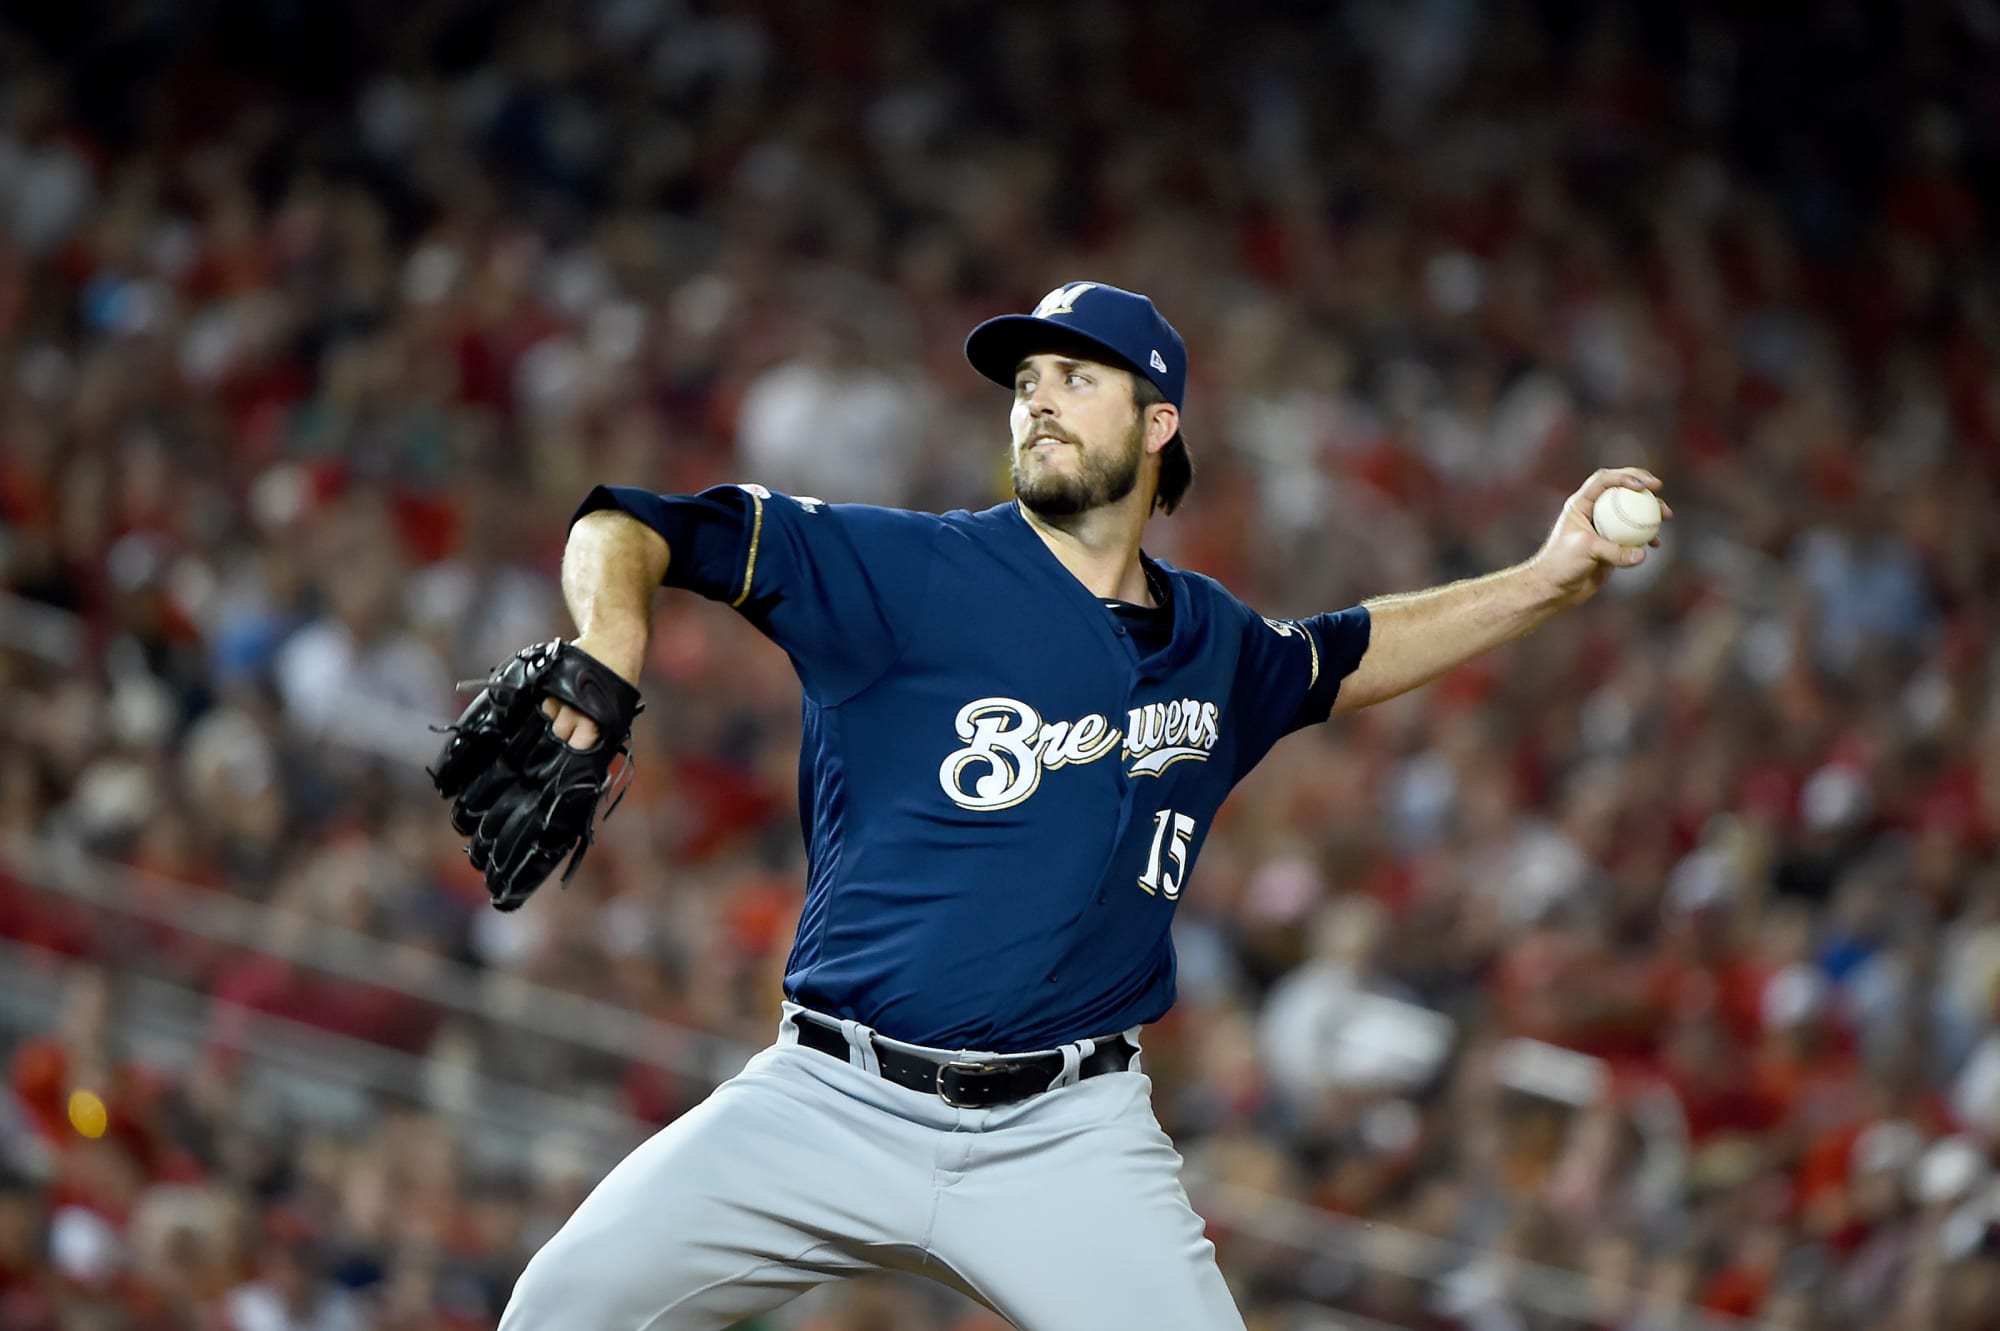 Report: Padres close to signing top reliever Drew Pomeranz